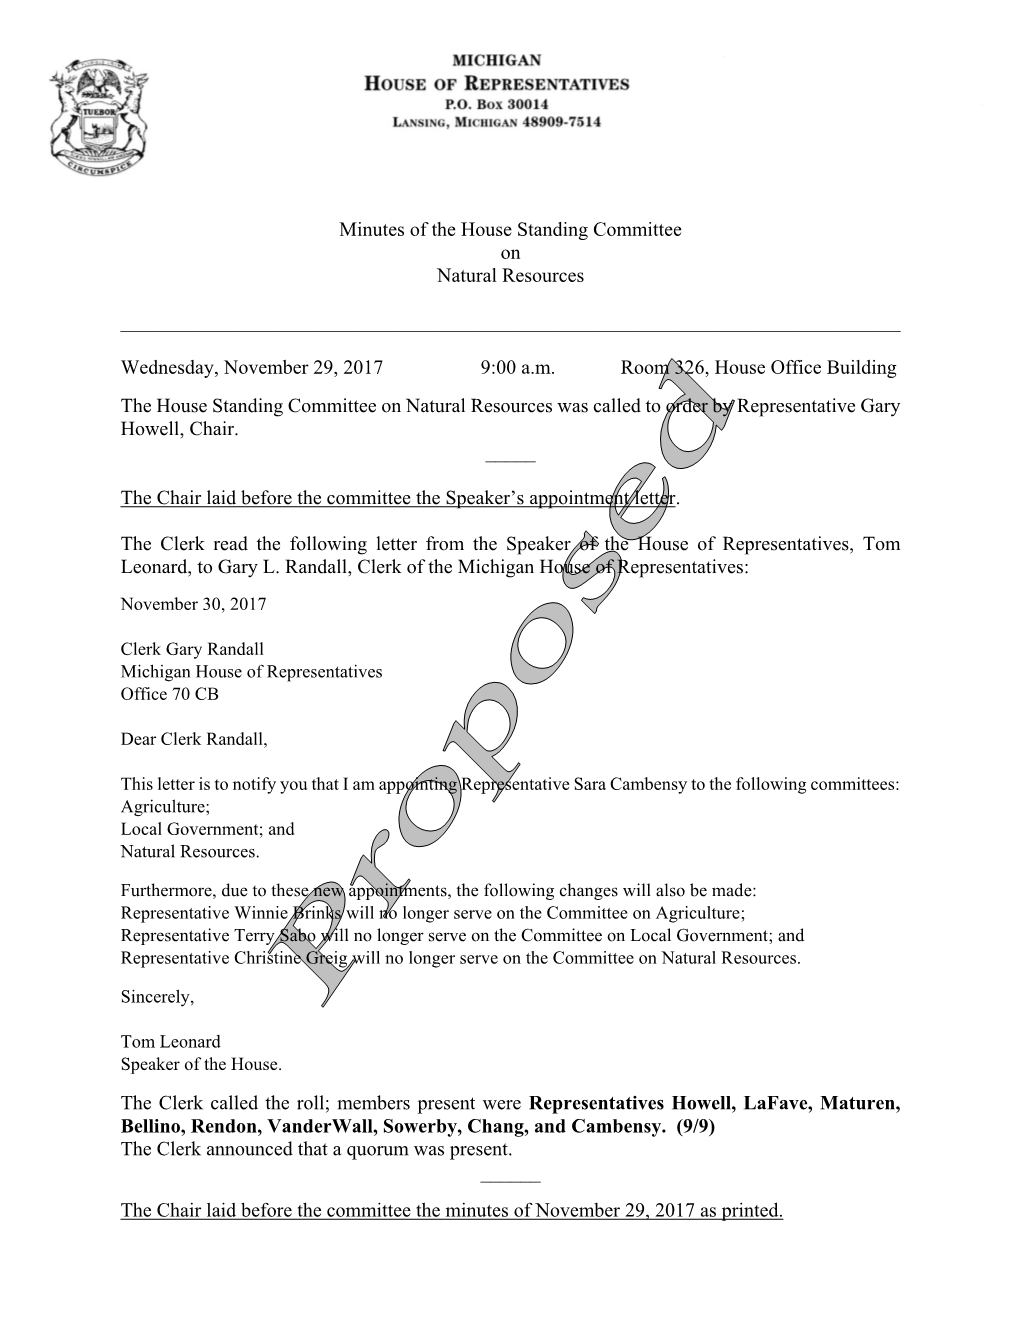 Minutes of the House Standing Committee on Natural Resources